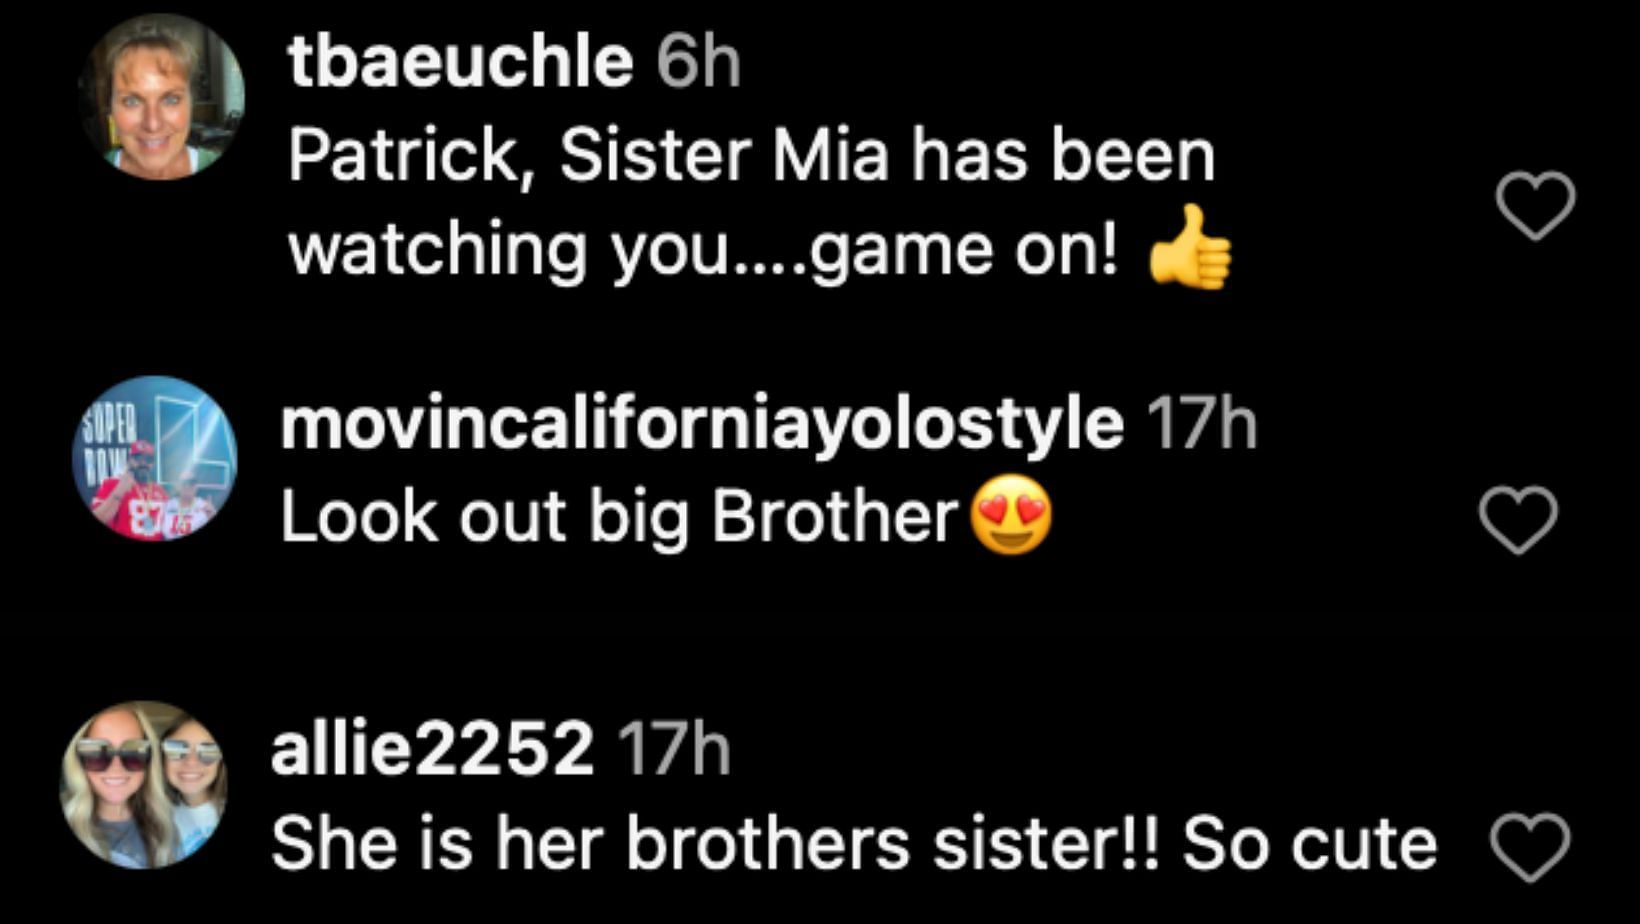 Fans on Patrick watching his back thanks to his sister&#039;s arm. Credit:@randimahomes (IG)